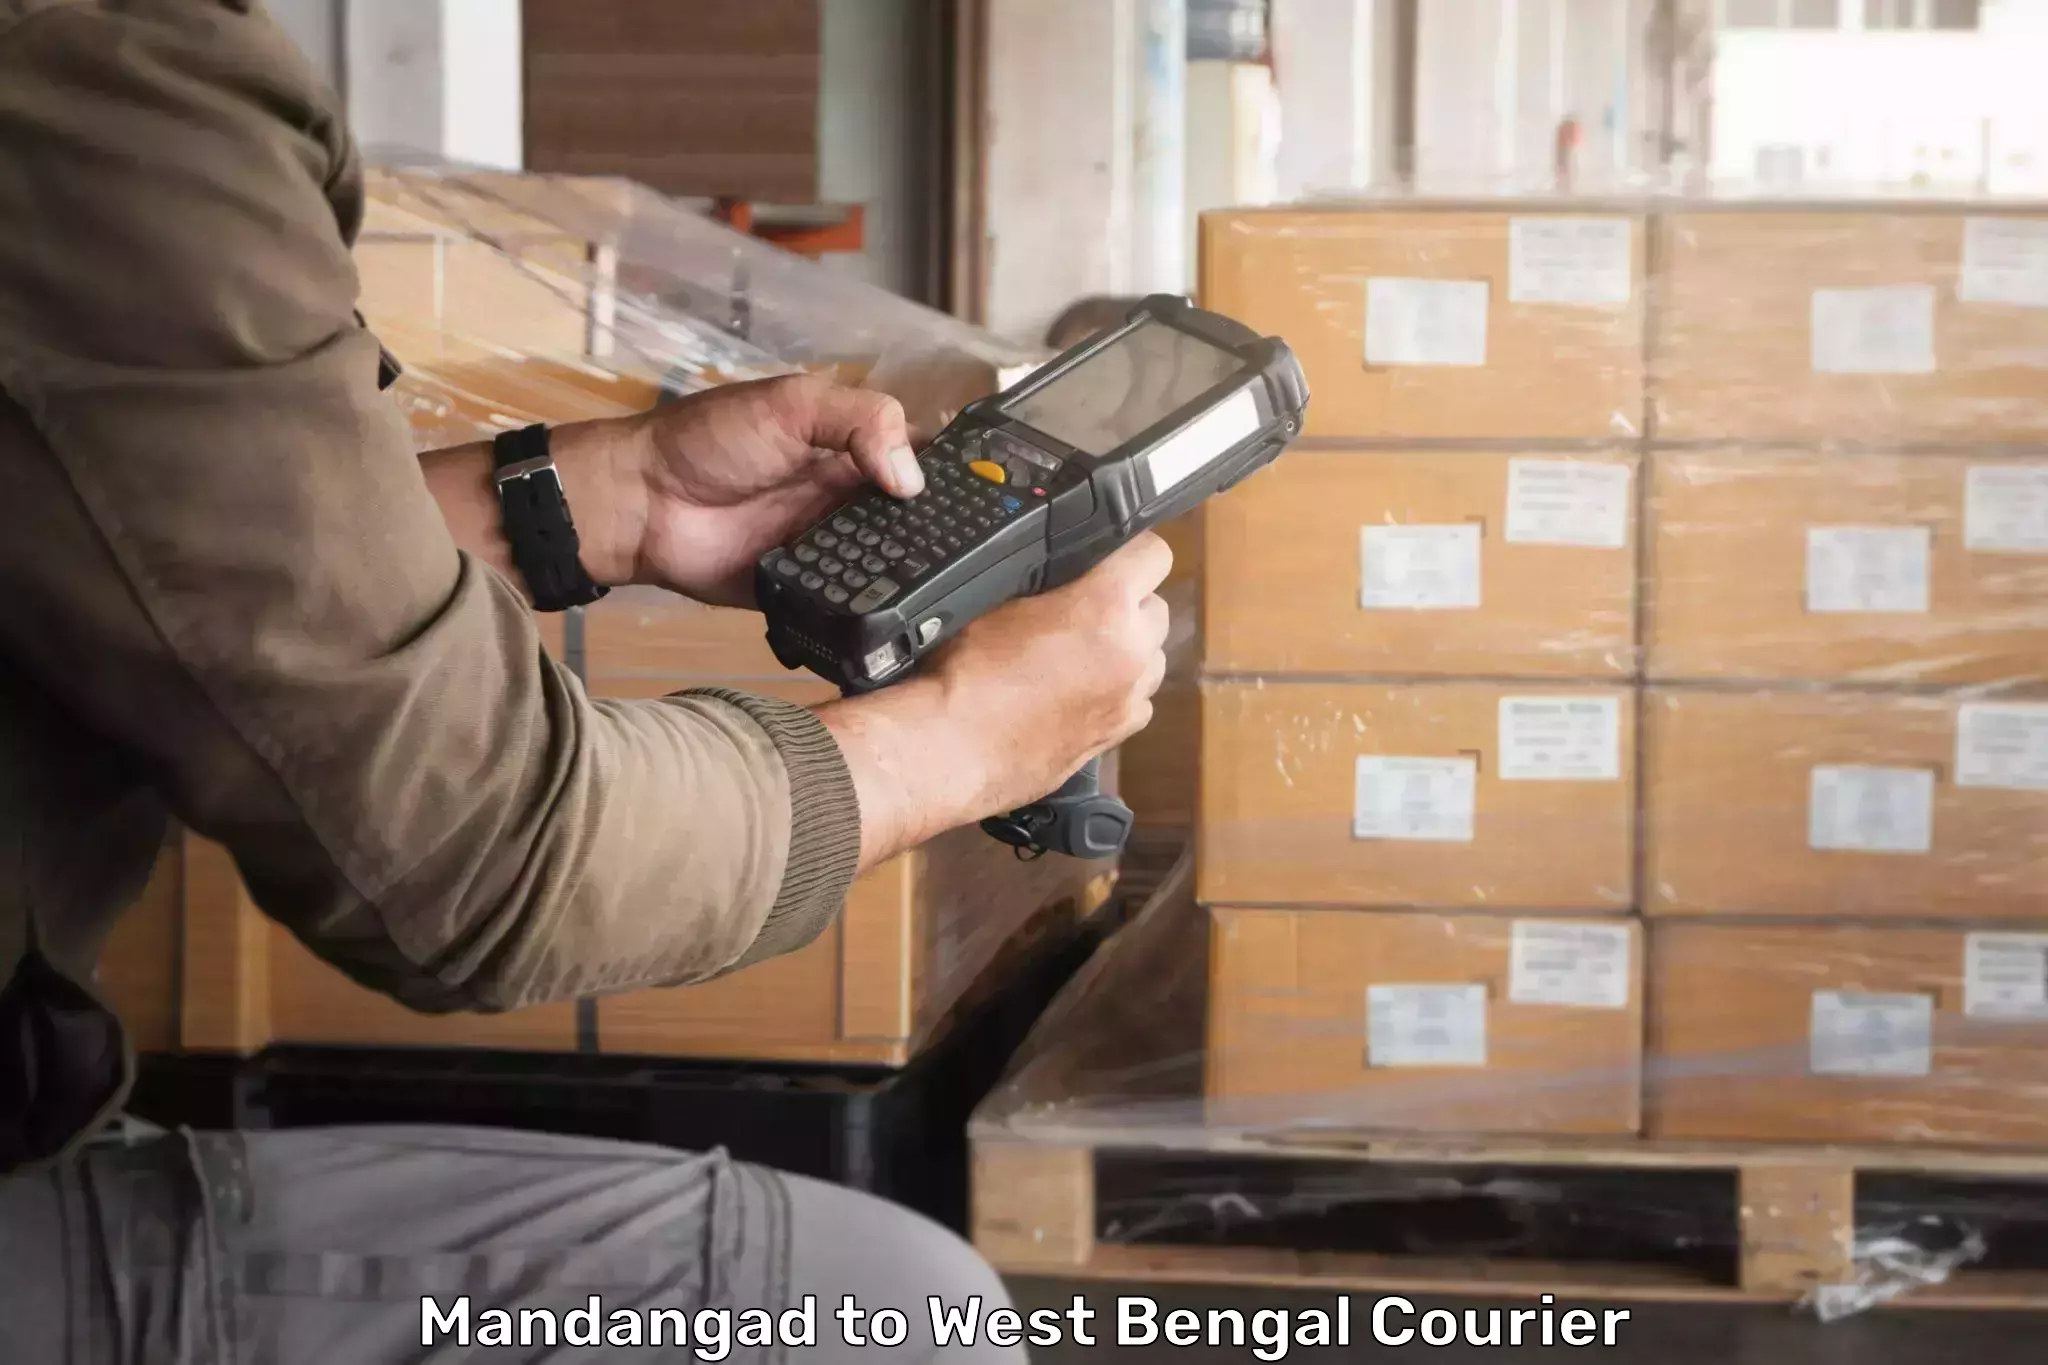 Express delivery capabilities Mandangad to West Bengal